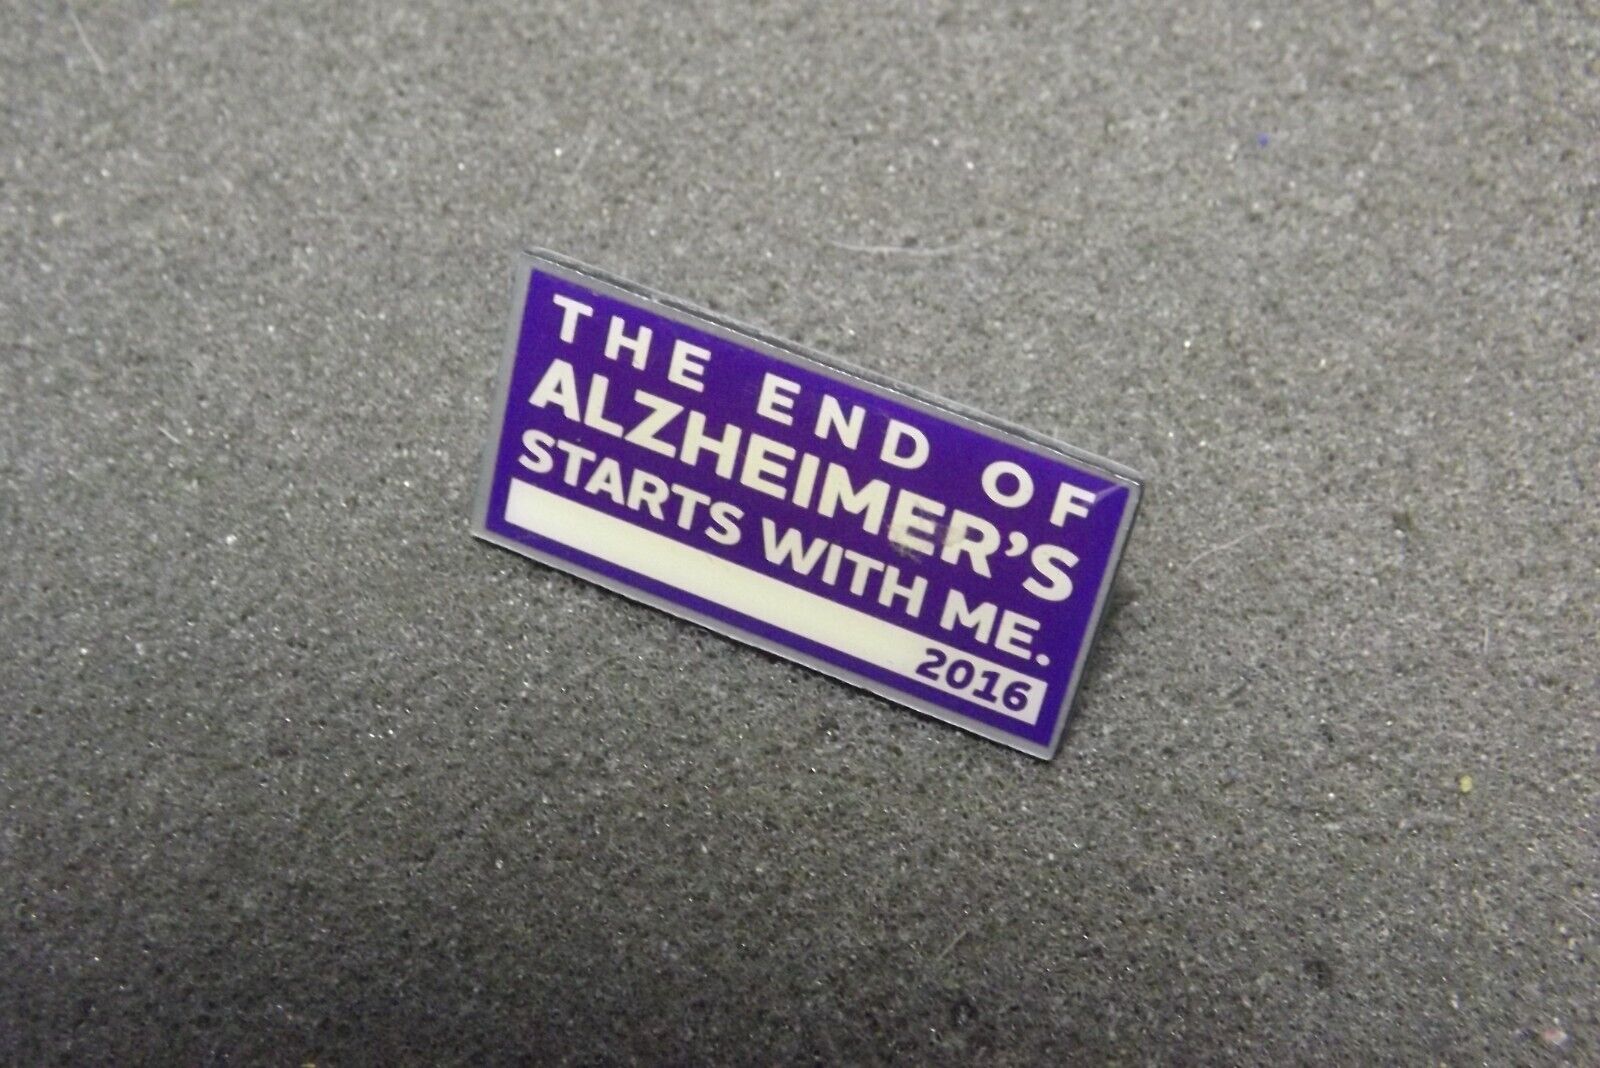 2016 The End Of Alzheimer's Starts With Me Lapel Pin